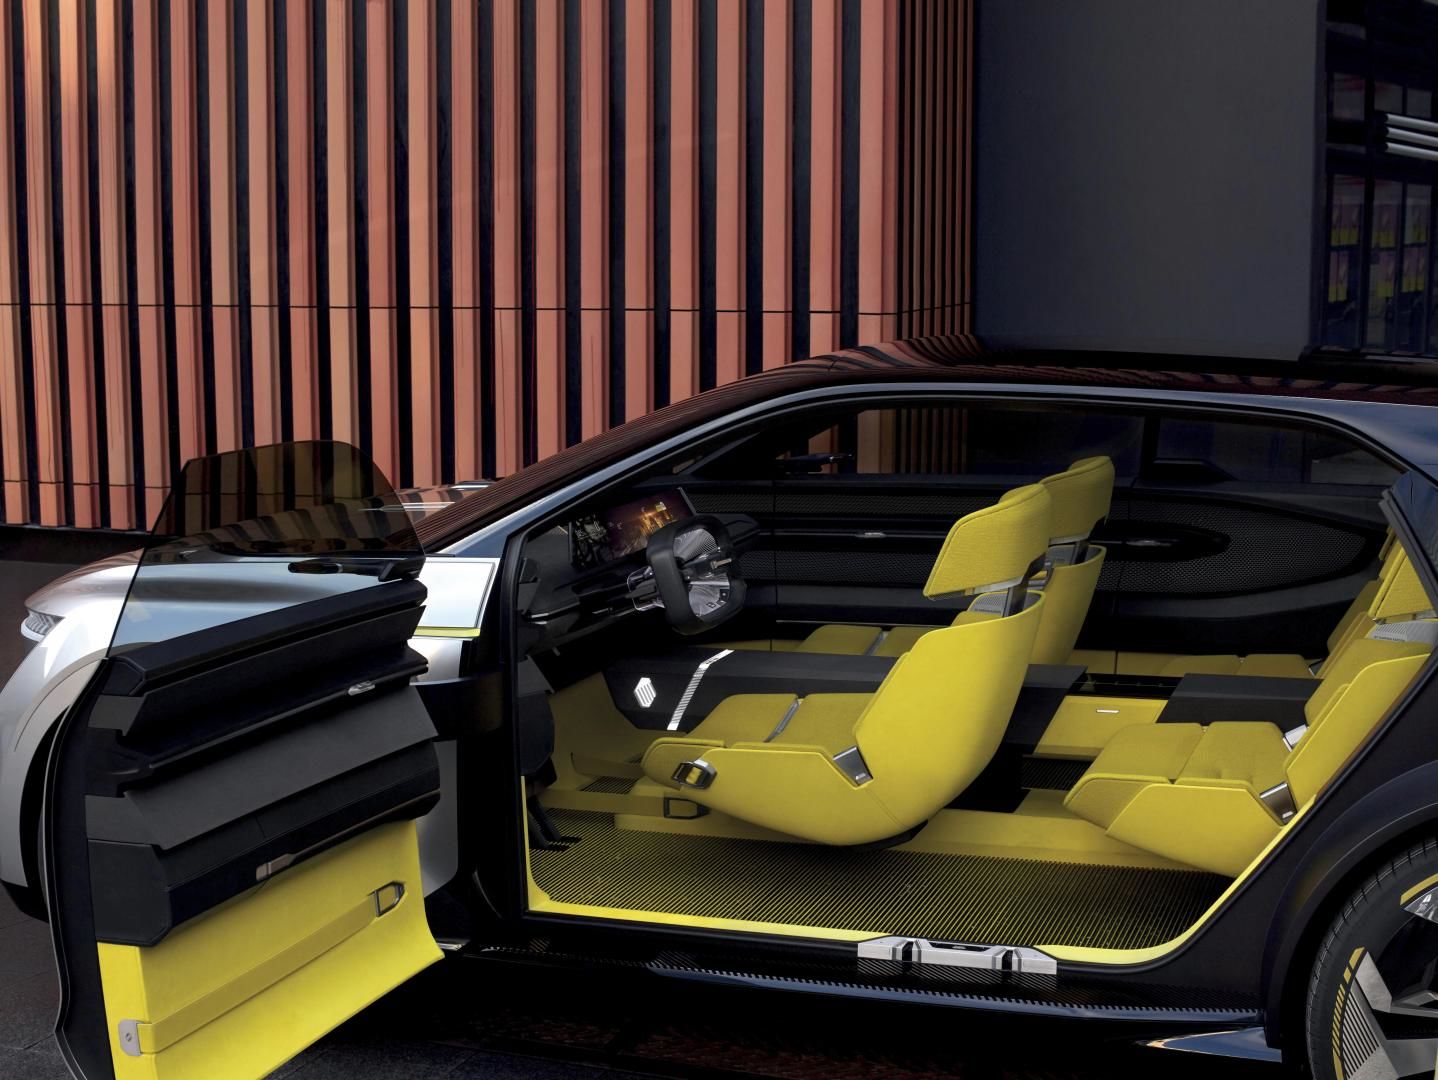 Interior of the Renault Morphoz concept electric crossover